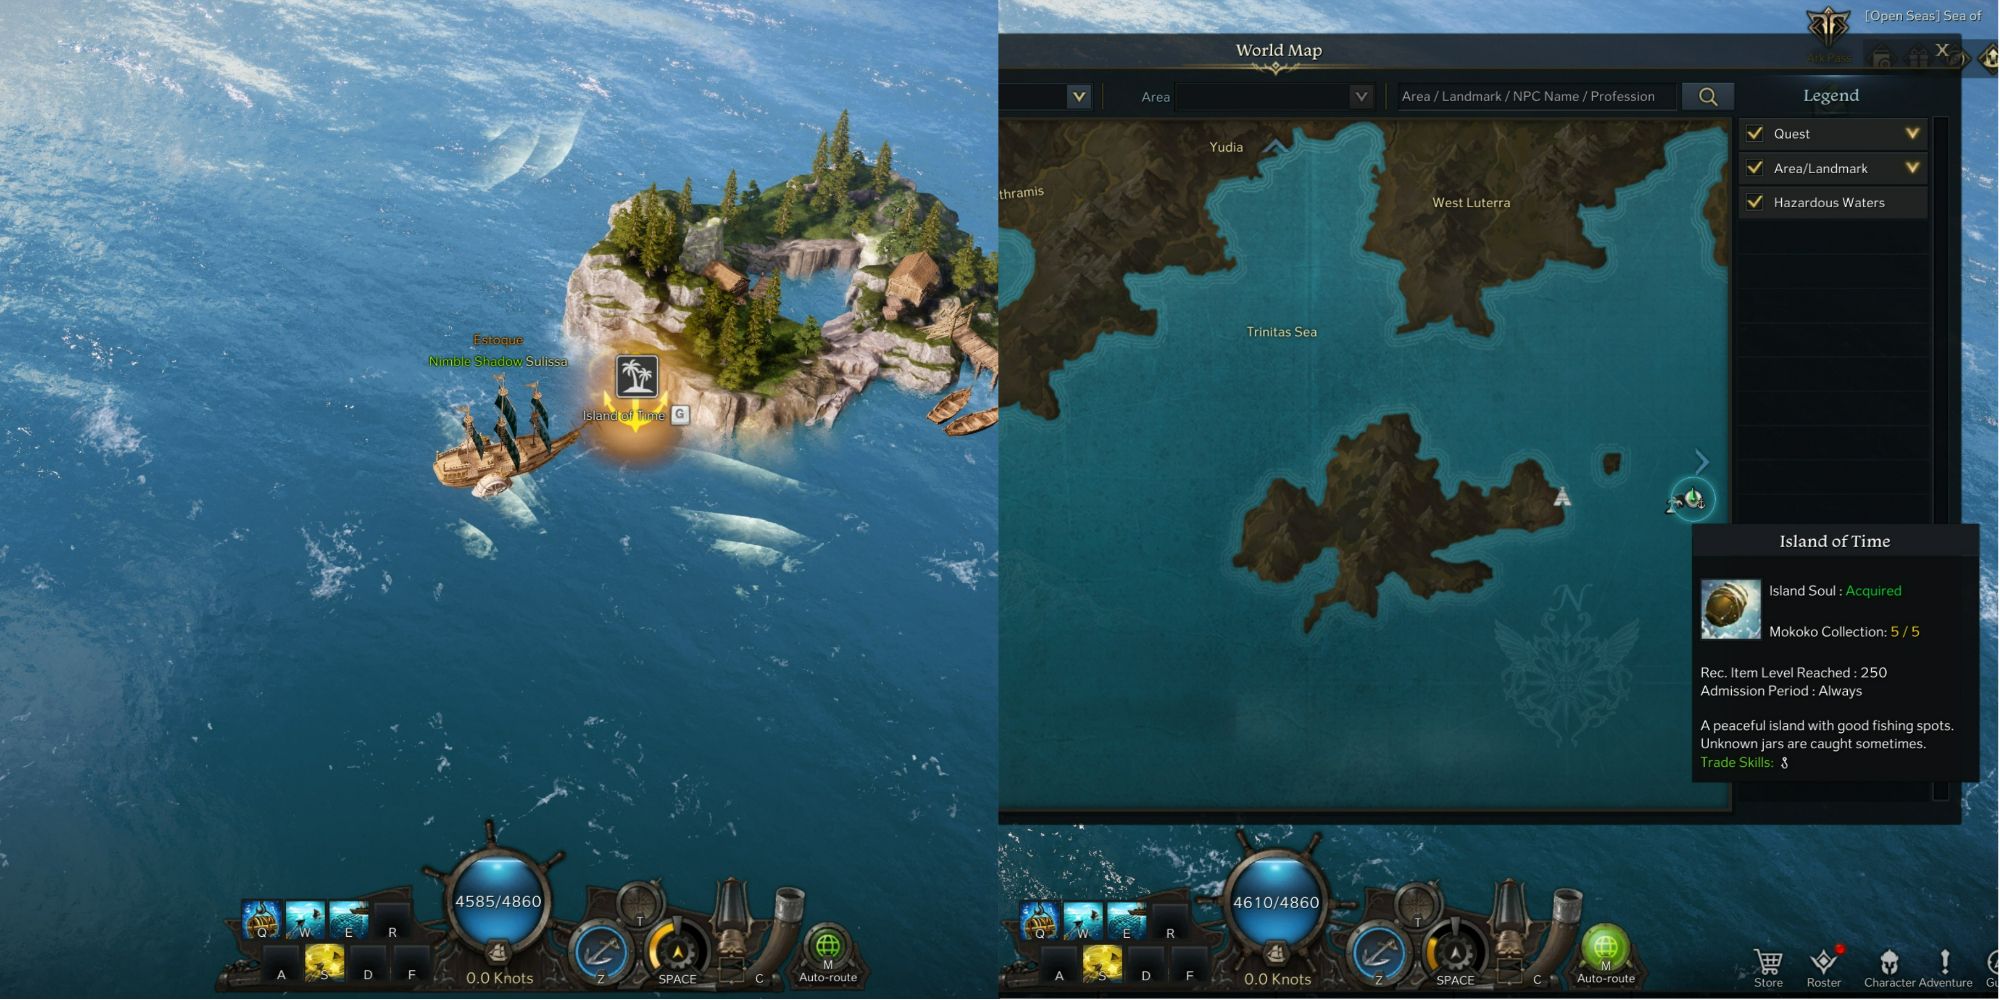 Lost Ark split image of Island of Time location on open sea and on map